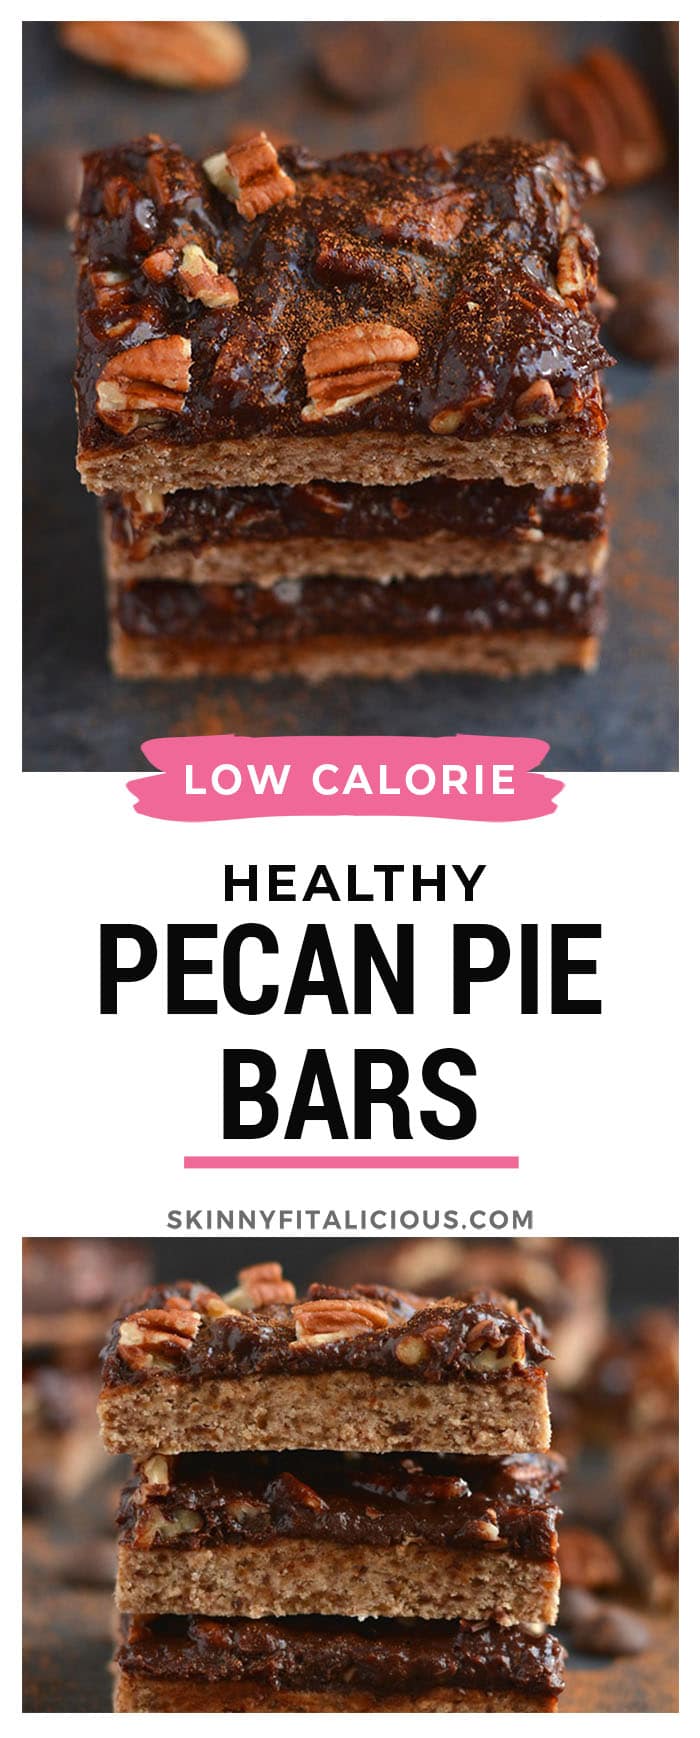 Chocolate Pecan Pie Bars! A healthy spin on pecan pie made free of gluten and refined sugar. EASY to bake and perfectly portioned for those watching their weight!